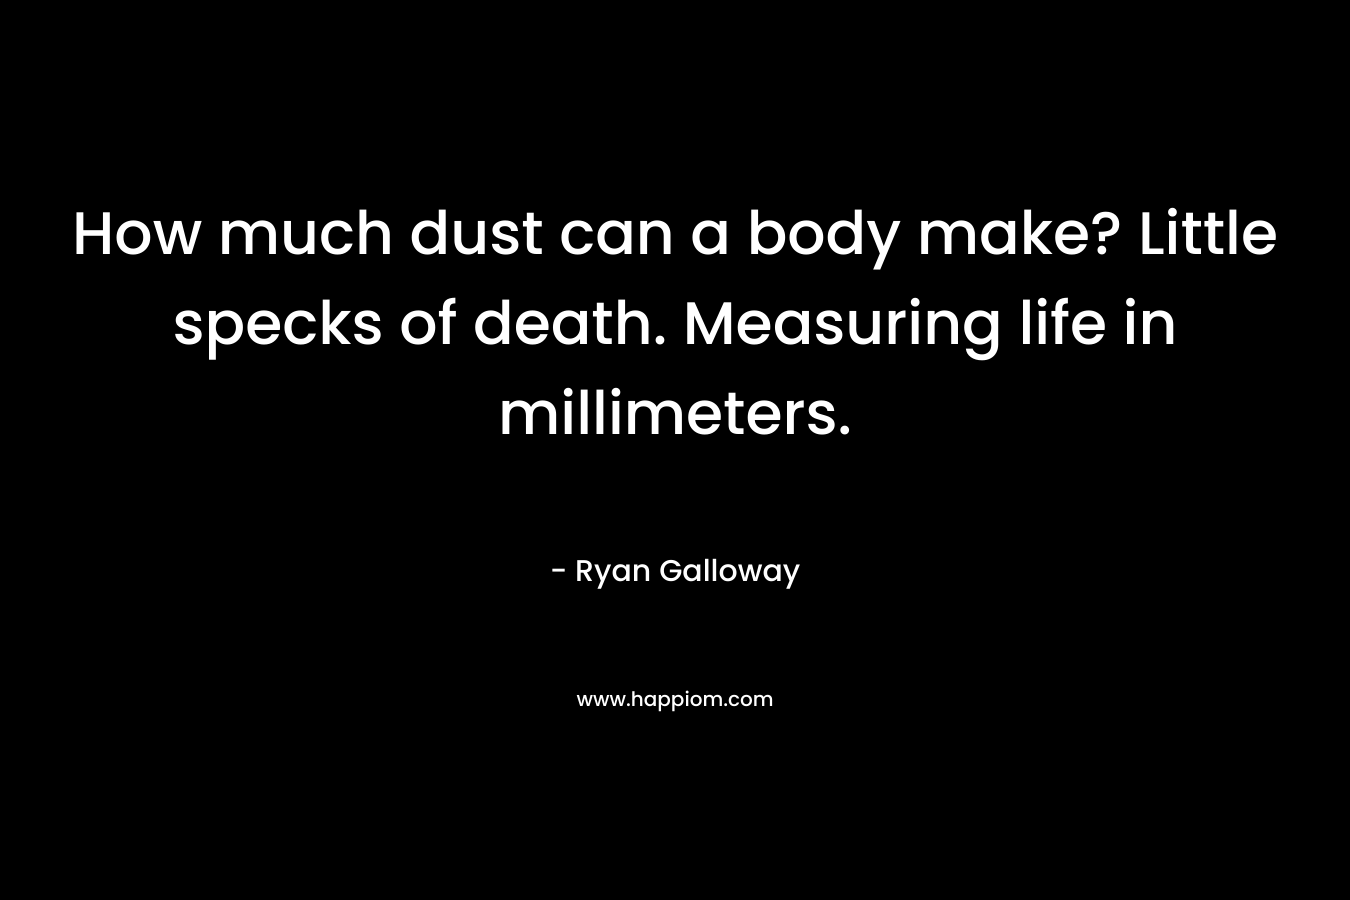 How much dust can a body make? Little specks of death. Measuring life in millimeters.